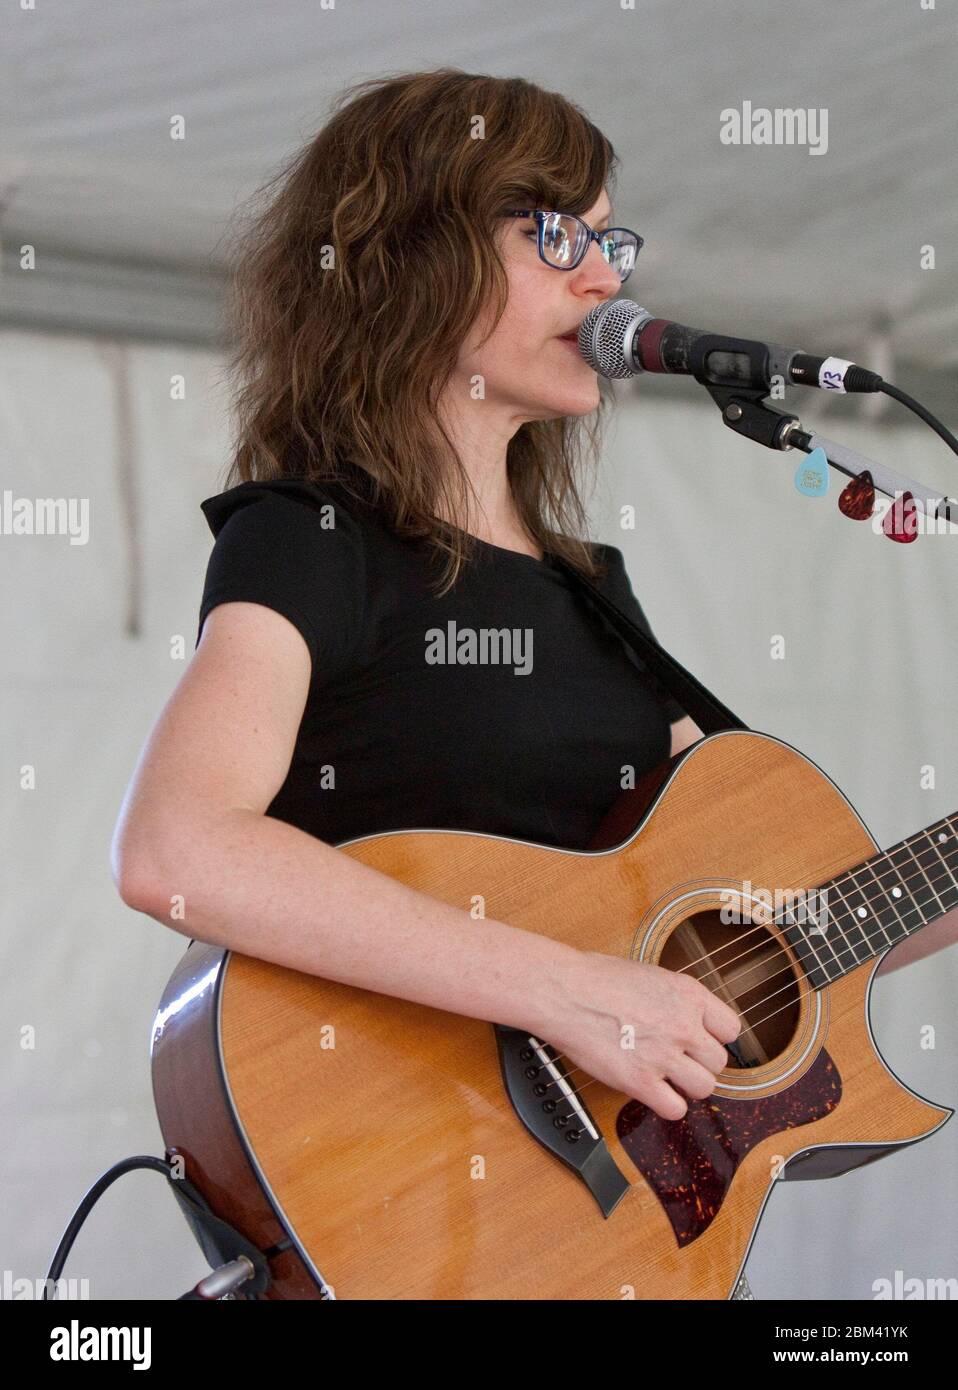 Austin Texas USA, October 22 2011: Singer-songwriter Lisa Loeb performs songs from her Silly Sing-Along book and CD during her appearance at the Texas Book Festival. ©Marjorie Kamys Cotera/Daemmrich Photography Stock Photo